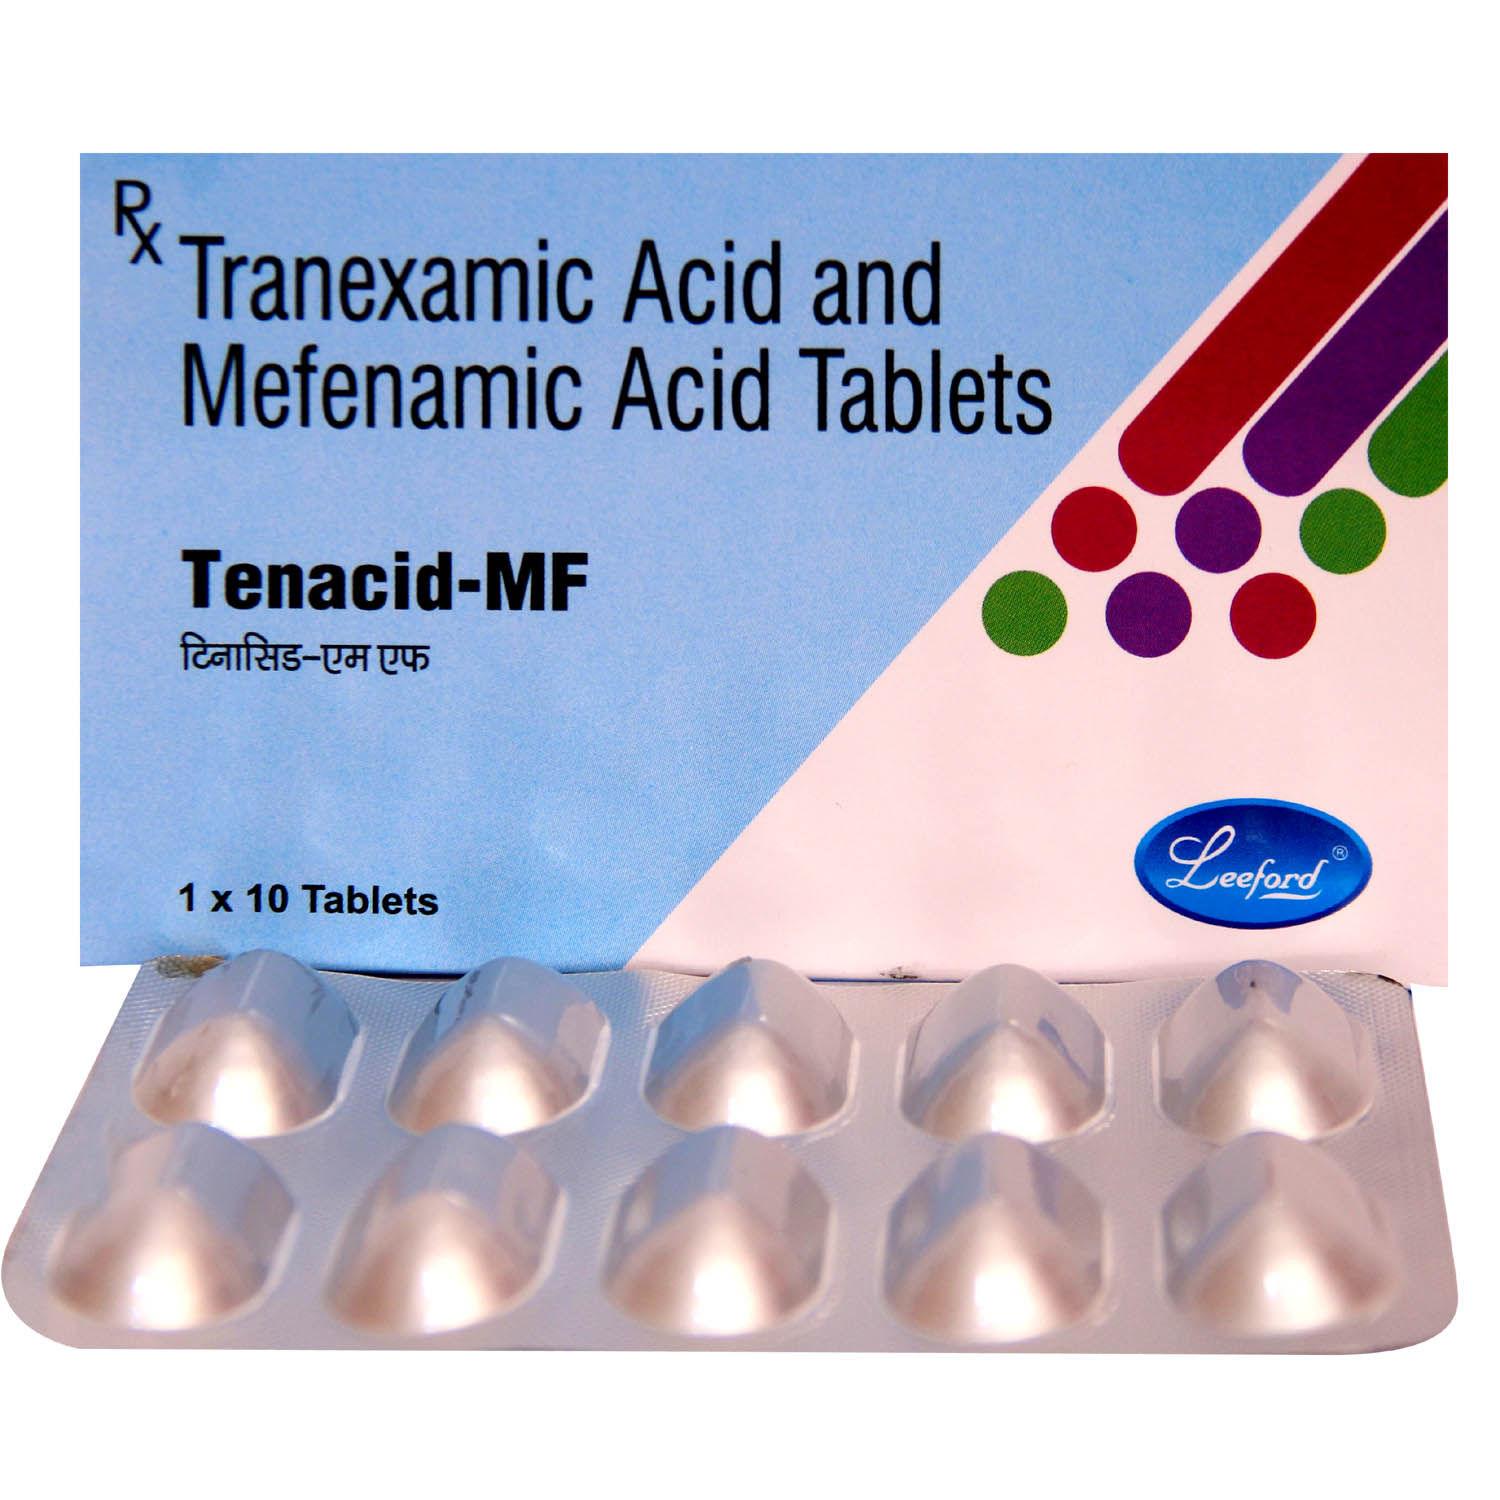 Tenacid Mf Tablet Price Uses Side Effects Composition Apollo 24 7